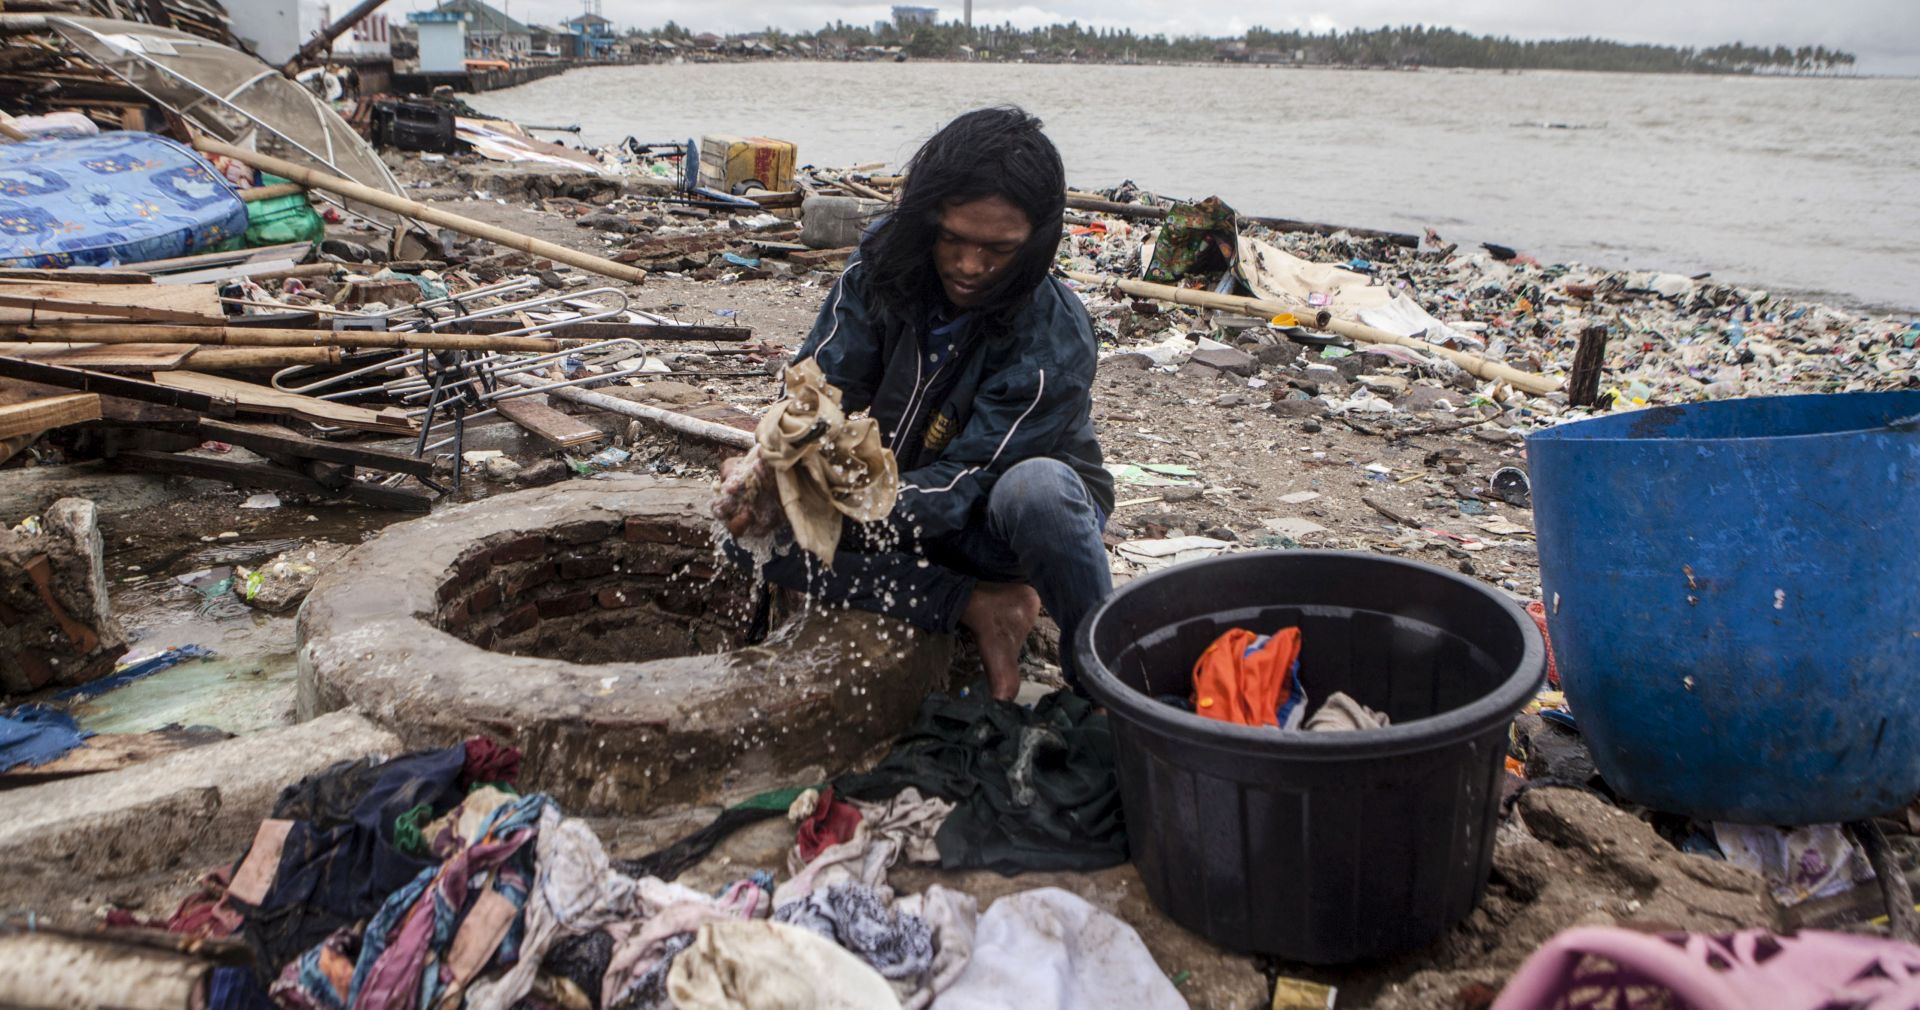 epa07250129 A resident collects usable belongings in the ruins of their houses in Labuan, Banten, Indonesia, 27 December 2018. According to the Indonesian National Board for Disaster Management (BNPB), at least 430 people died and 1,459 others have been injured after a tsunami hit the coastal regions of the Sunda Strait.  EPA/ZULKIFLI